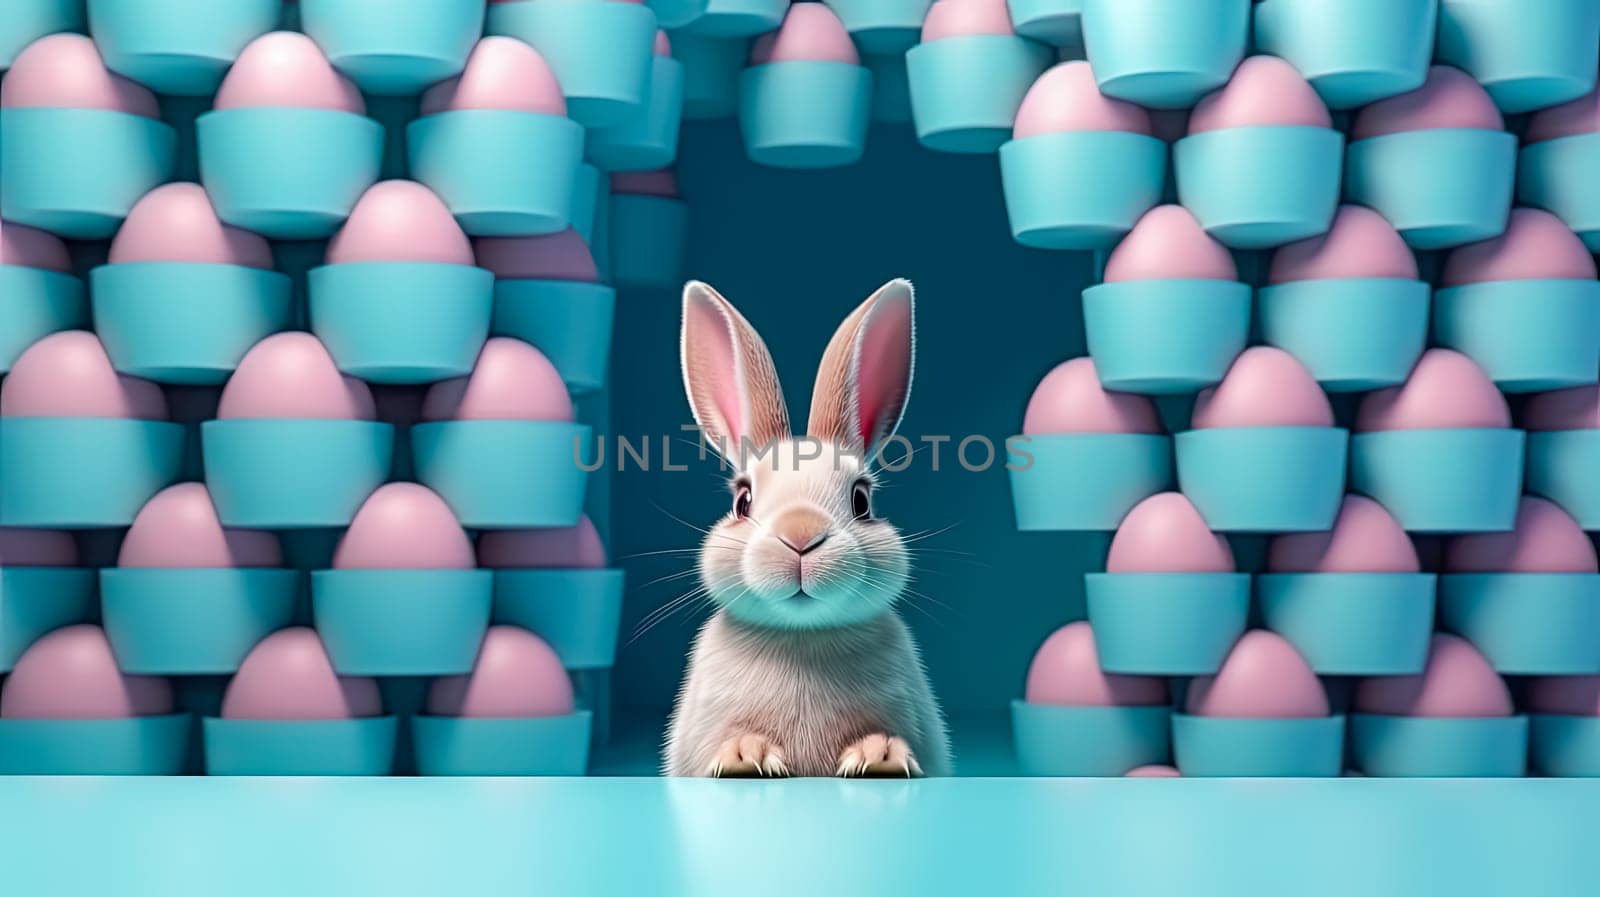 A playful Easter bunny colored paper background by Alla_Morozova93